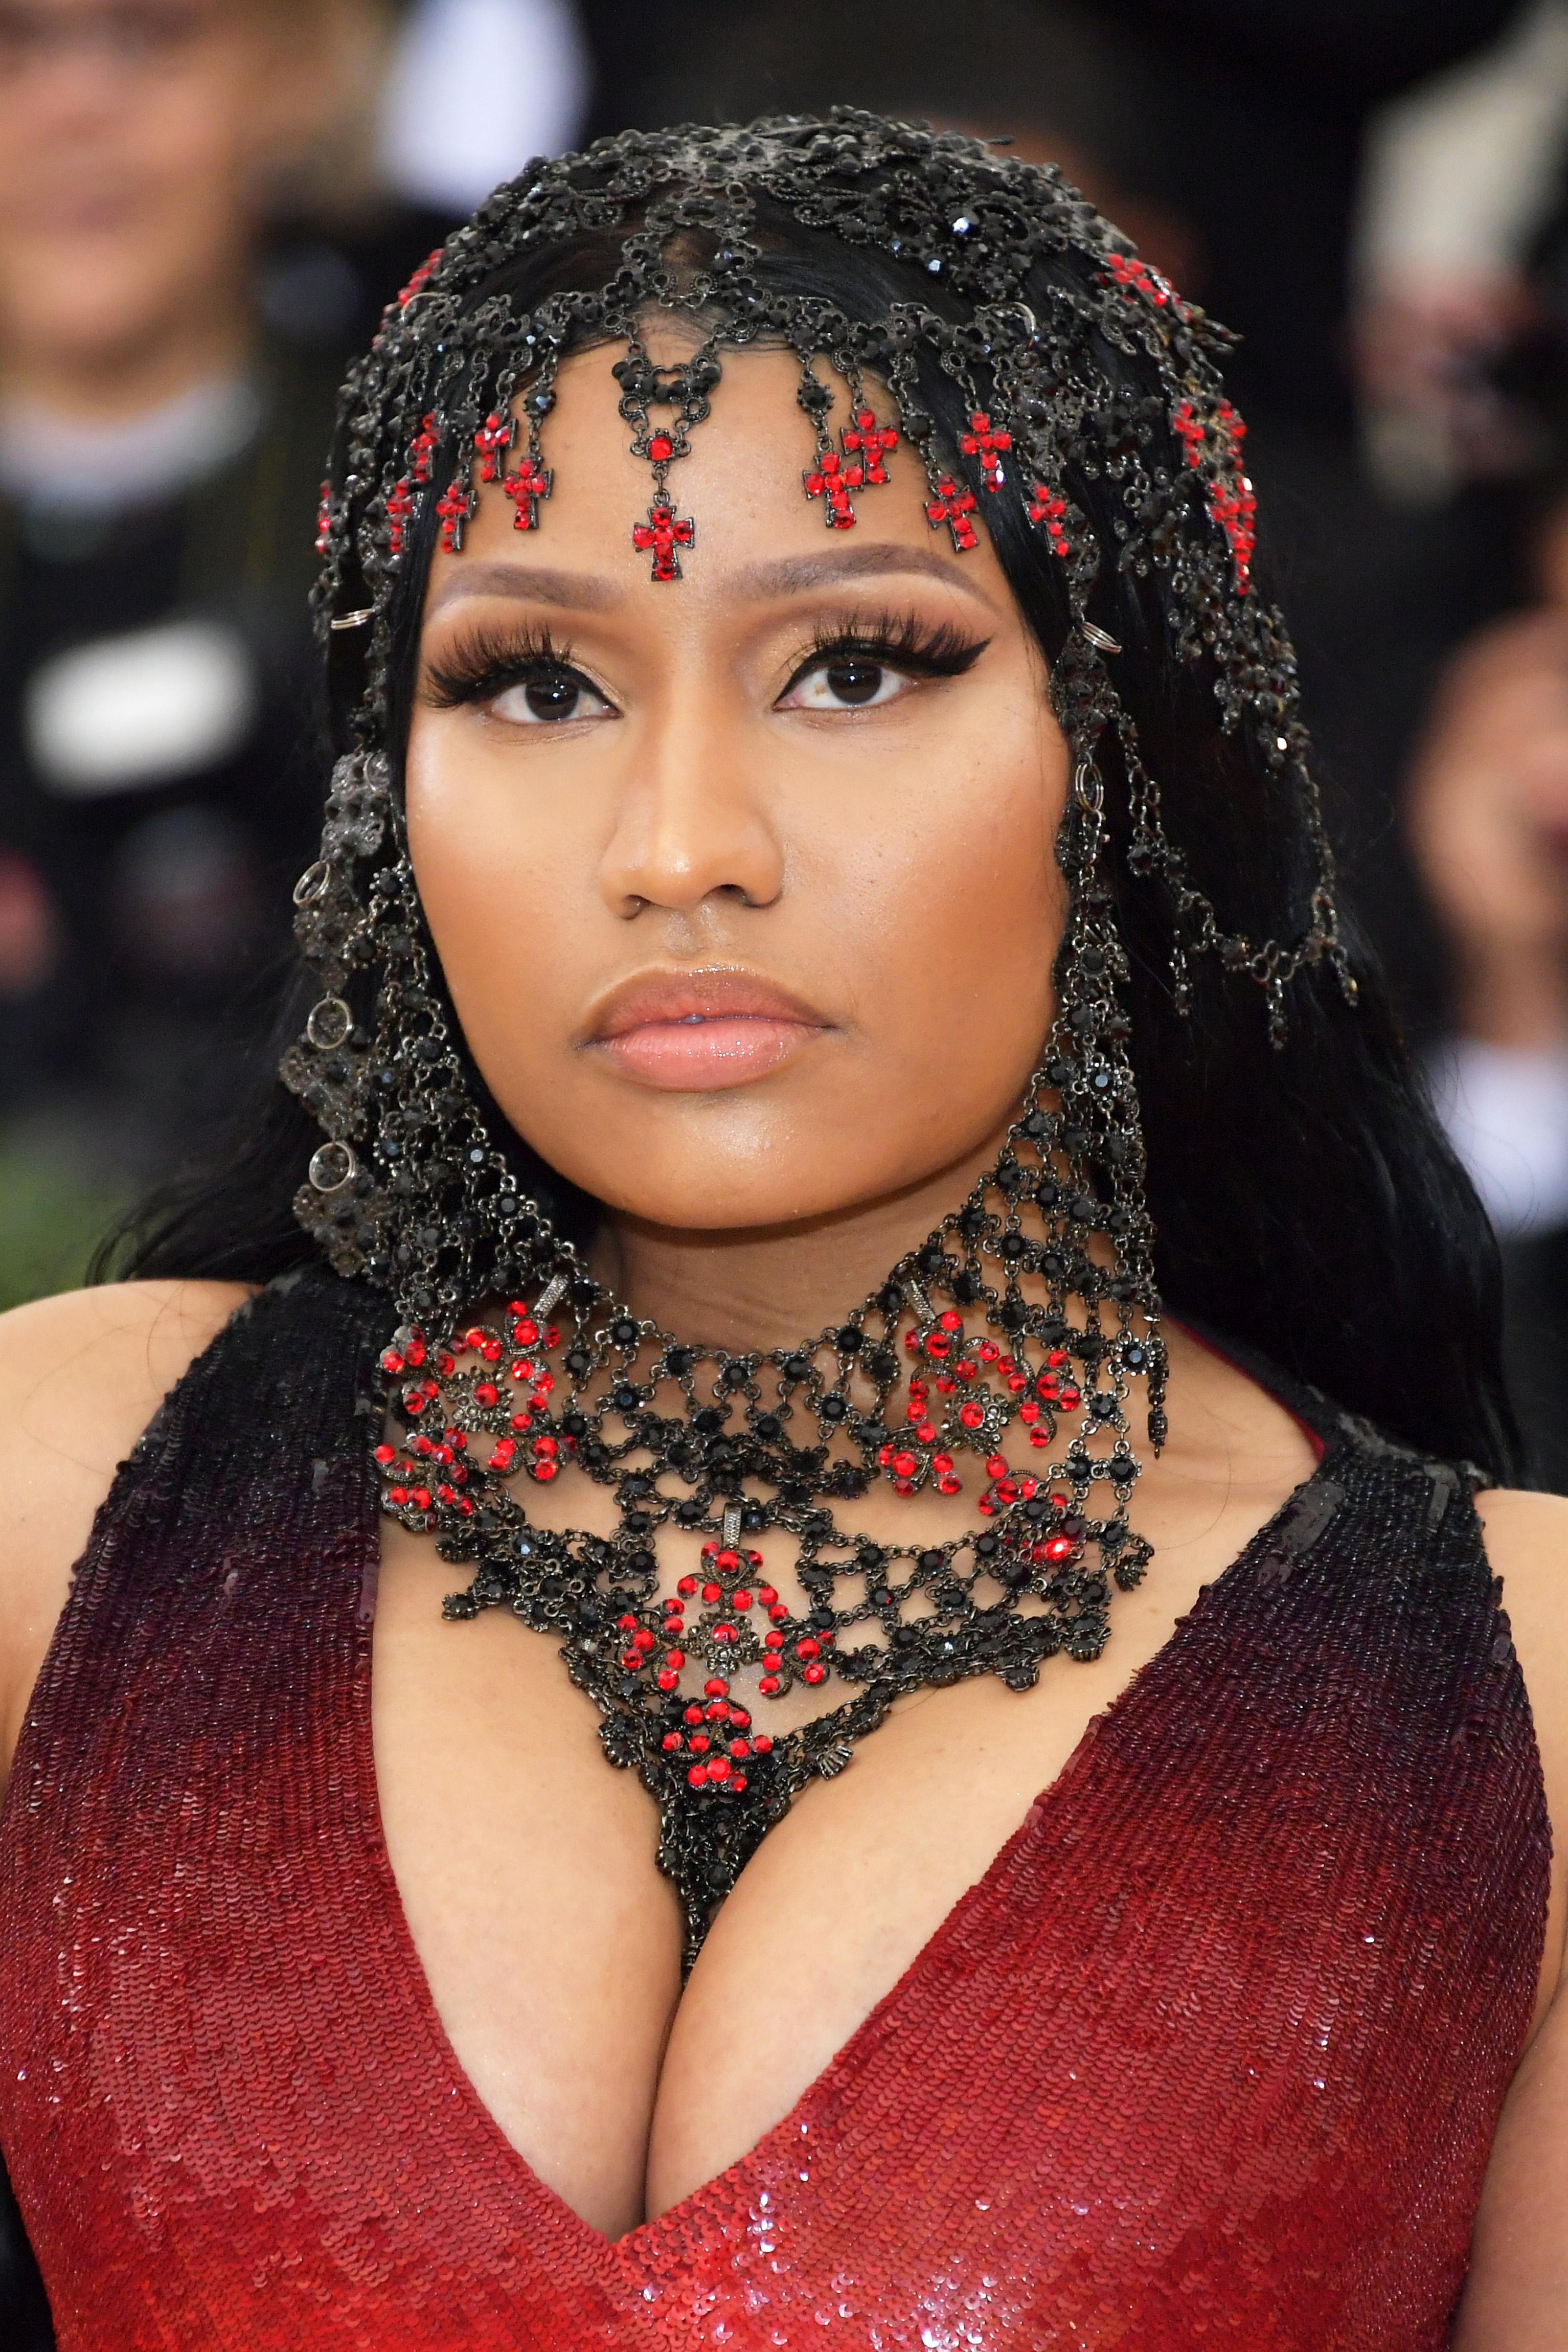 Close-up of Nicki at a media event in a deep_V outfit and ornate headgear